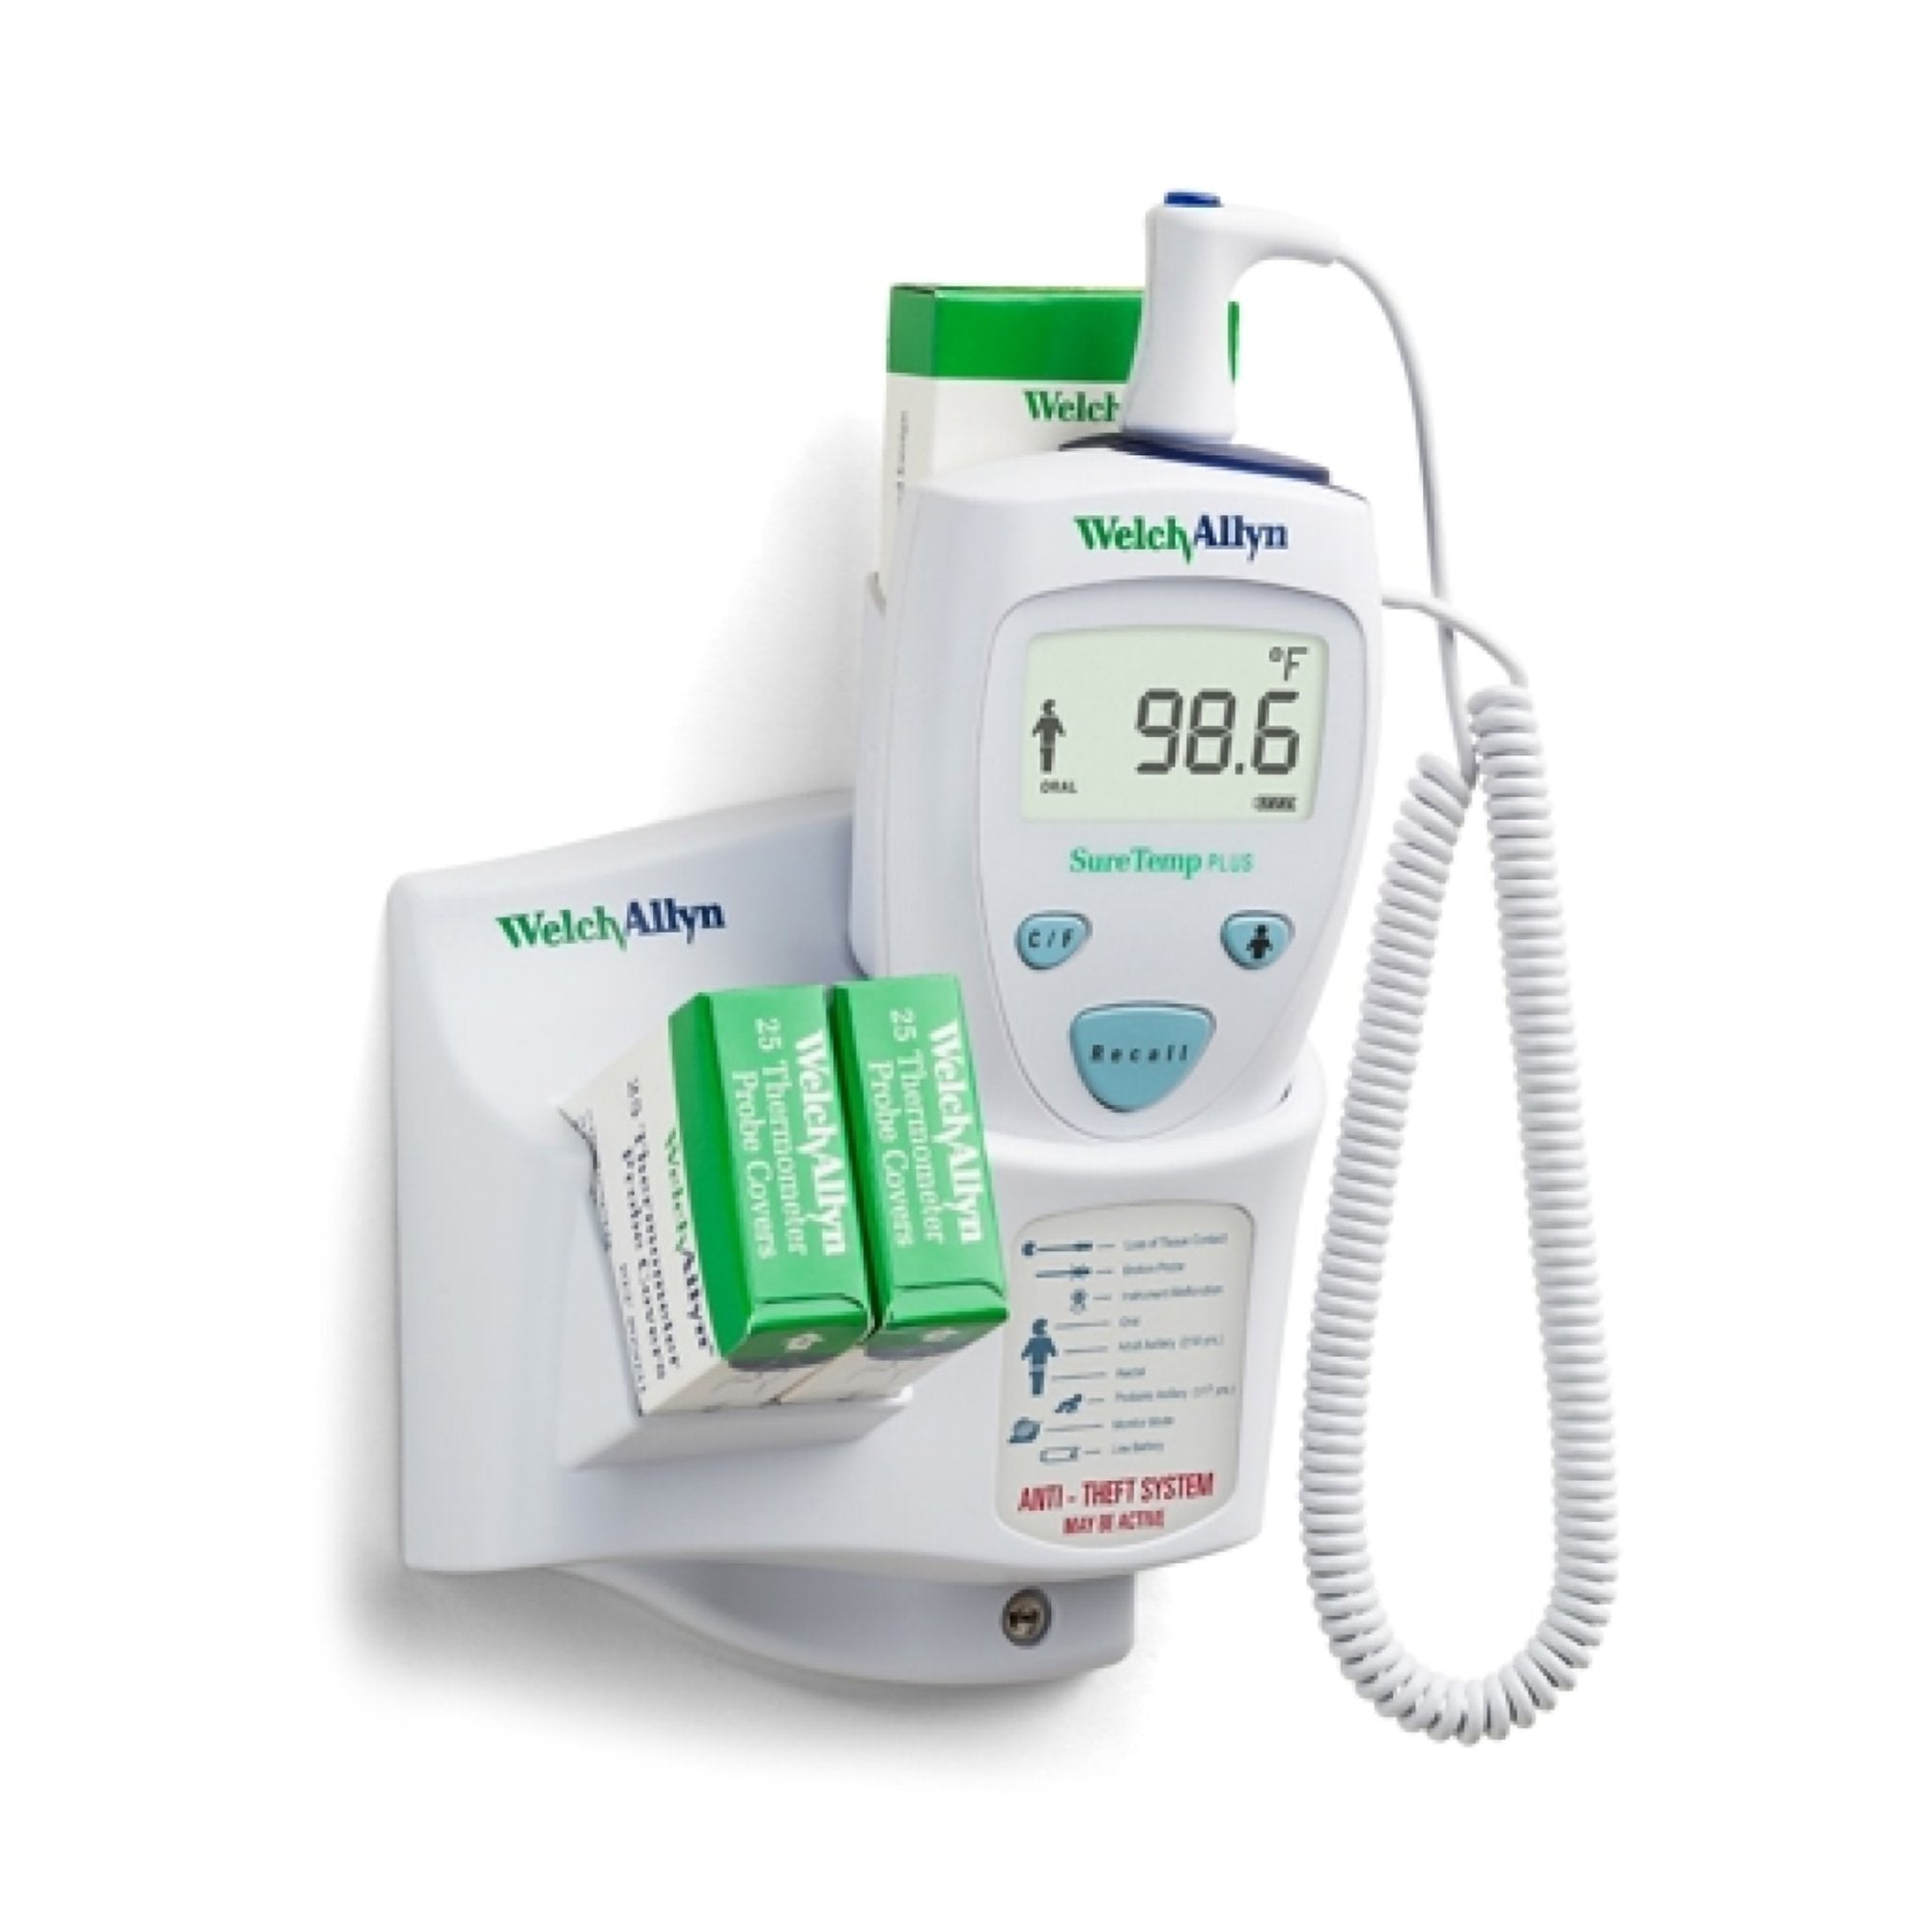 * Welch Allyn 01690-400 Electronic Probe Thermometer SureTemp® Oral / Rectal / Axillary Probe Wall Mount